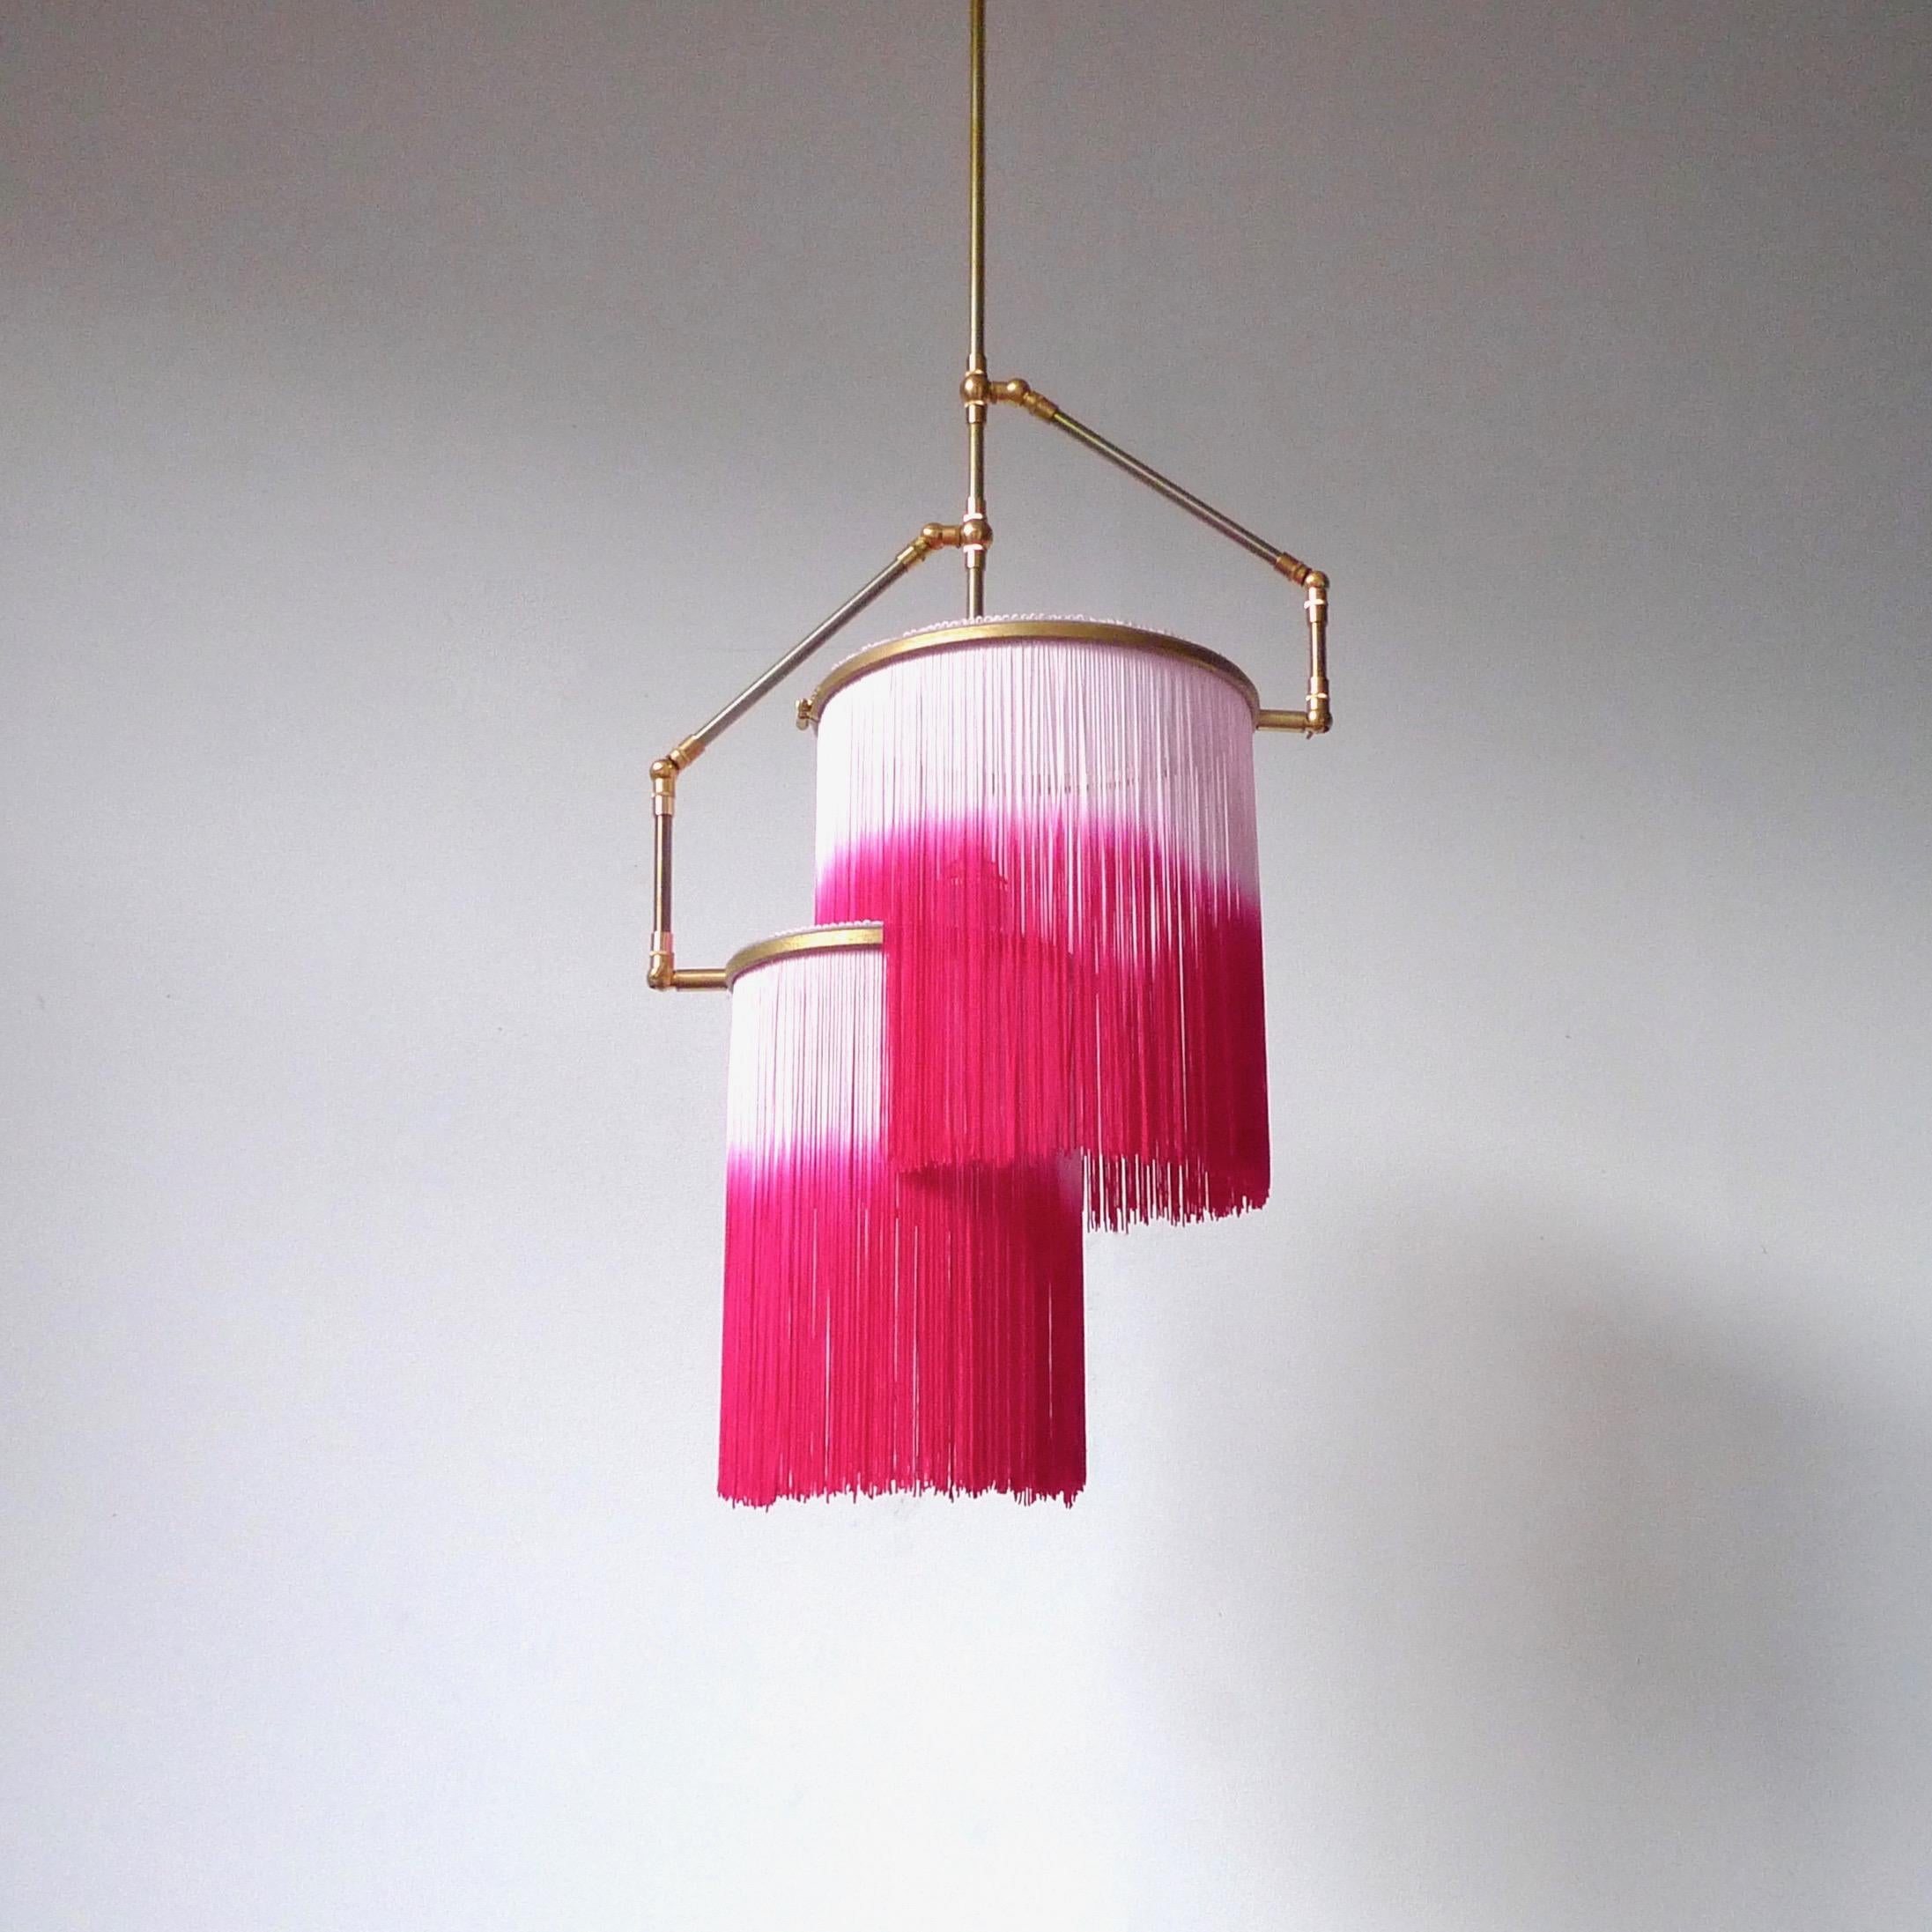 Pink Charme pendant lamp, Sander Bottinga

Dimensions: H 65 (can be customized) x W 38 x D 25 cm
Hand-Sculpted in brass, leather, wood and dip dyed colored Fringes in viscose.
The movable arms makes it possible to move the circles with fringes